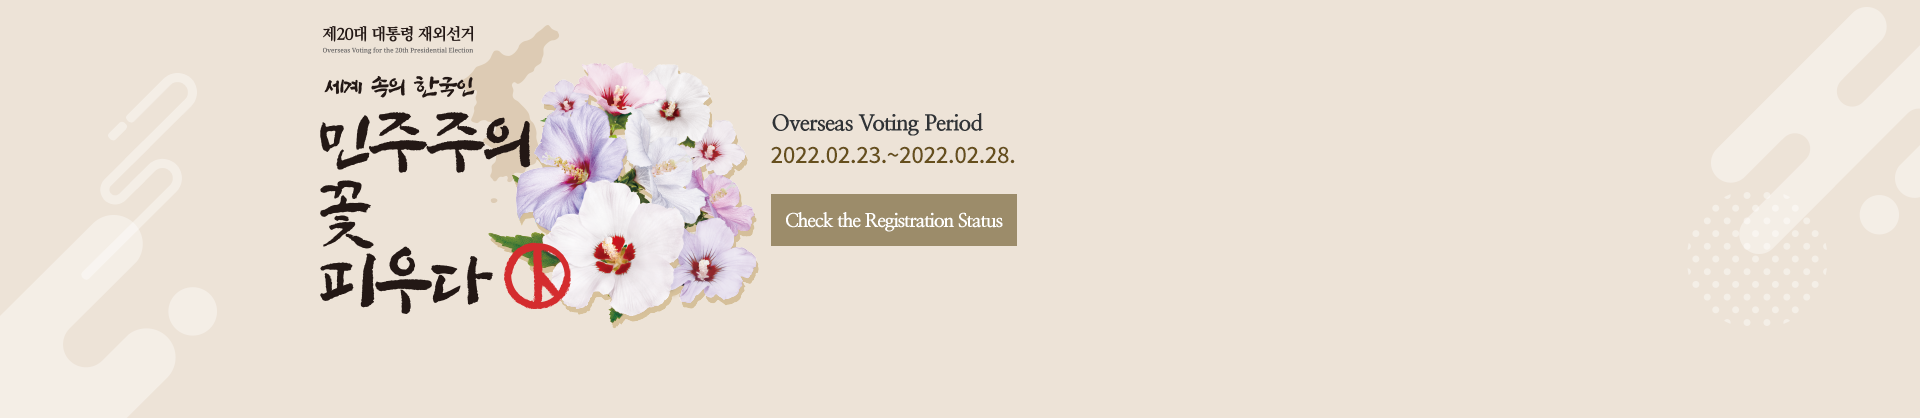 Check the Registration Status
Overseas Voting Period
2022.02.23. ~ 2022.02.28.